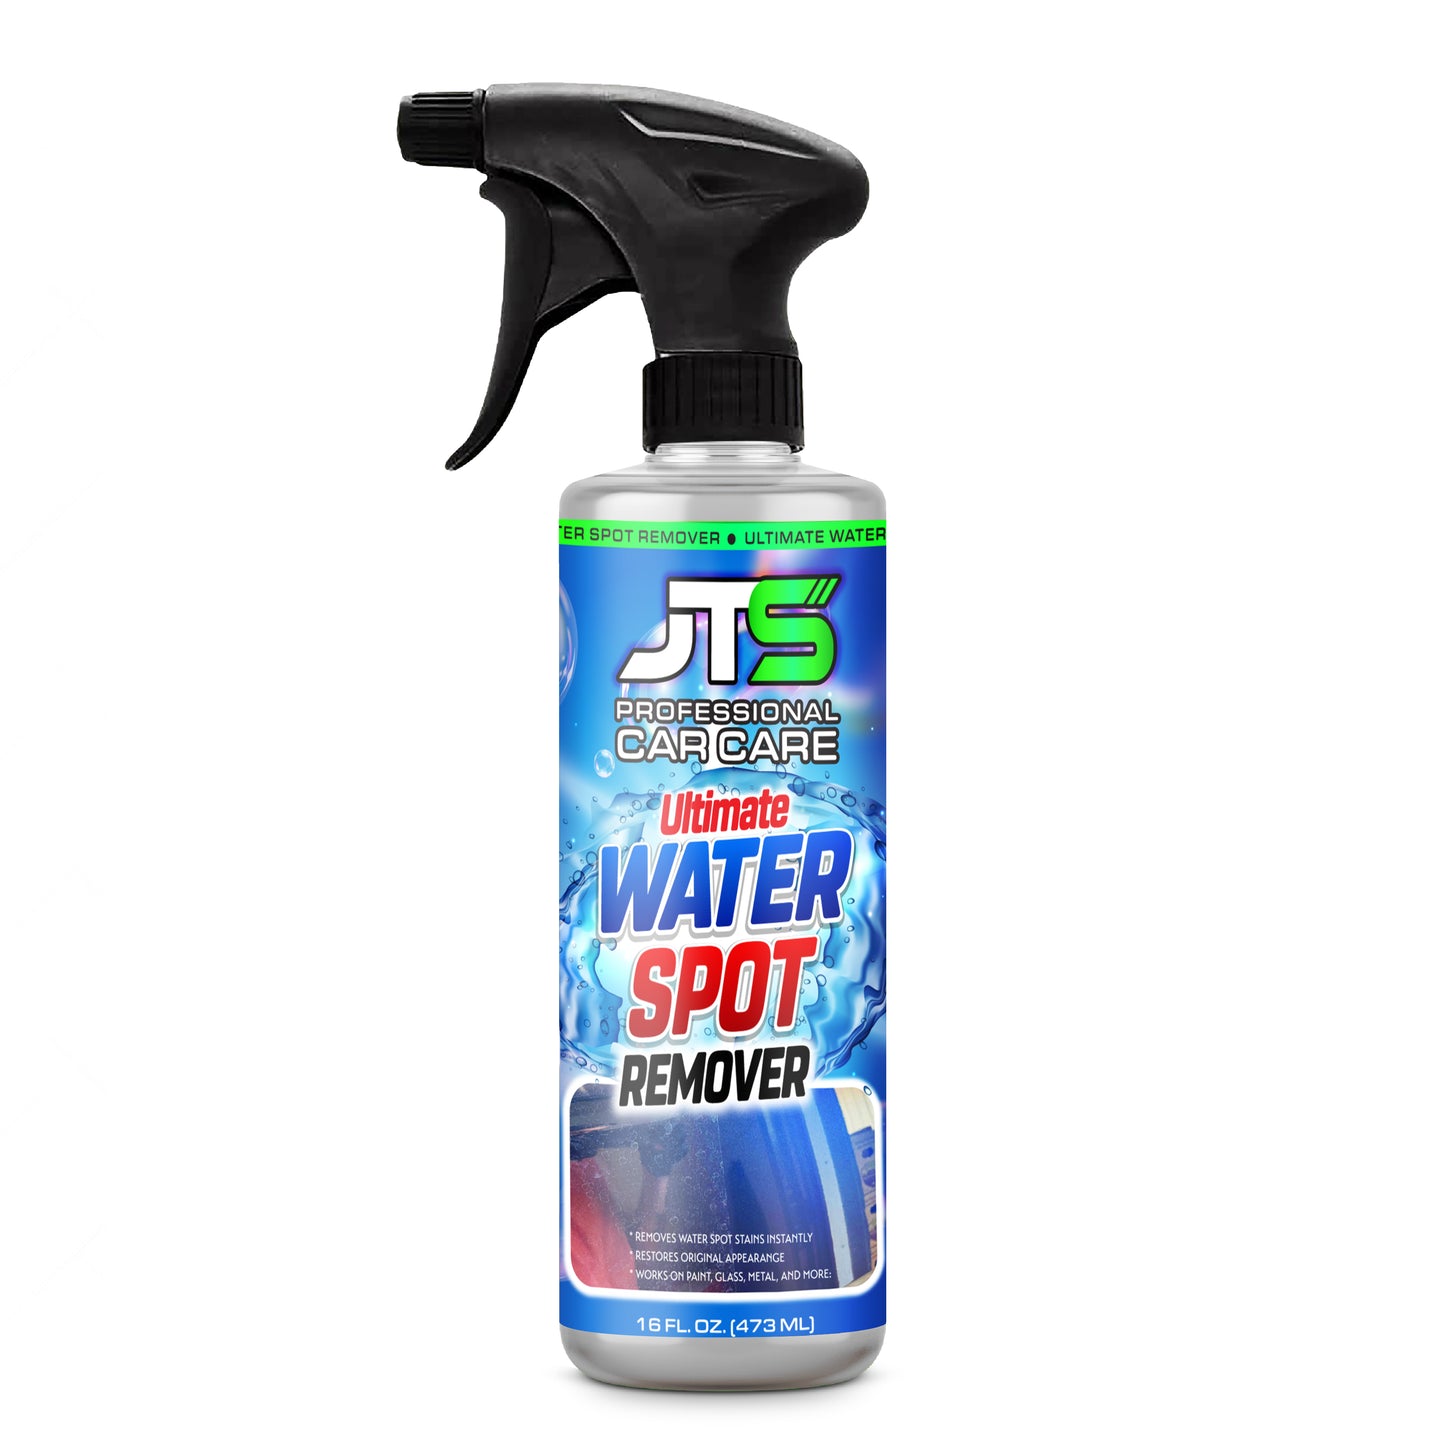 Ultimate Water Spot Remover, Instantly Removes Hard Water Spots, Spray on Wipe off, Safe for Cars, Trucks, Motorcycles, Watercraft, RVs & More